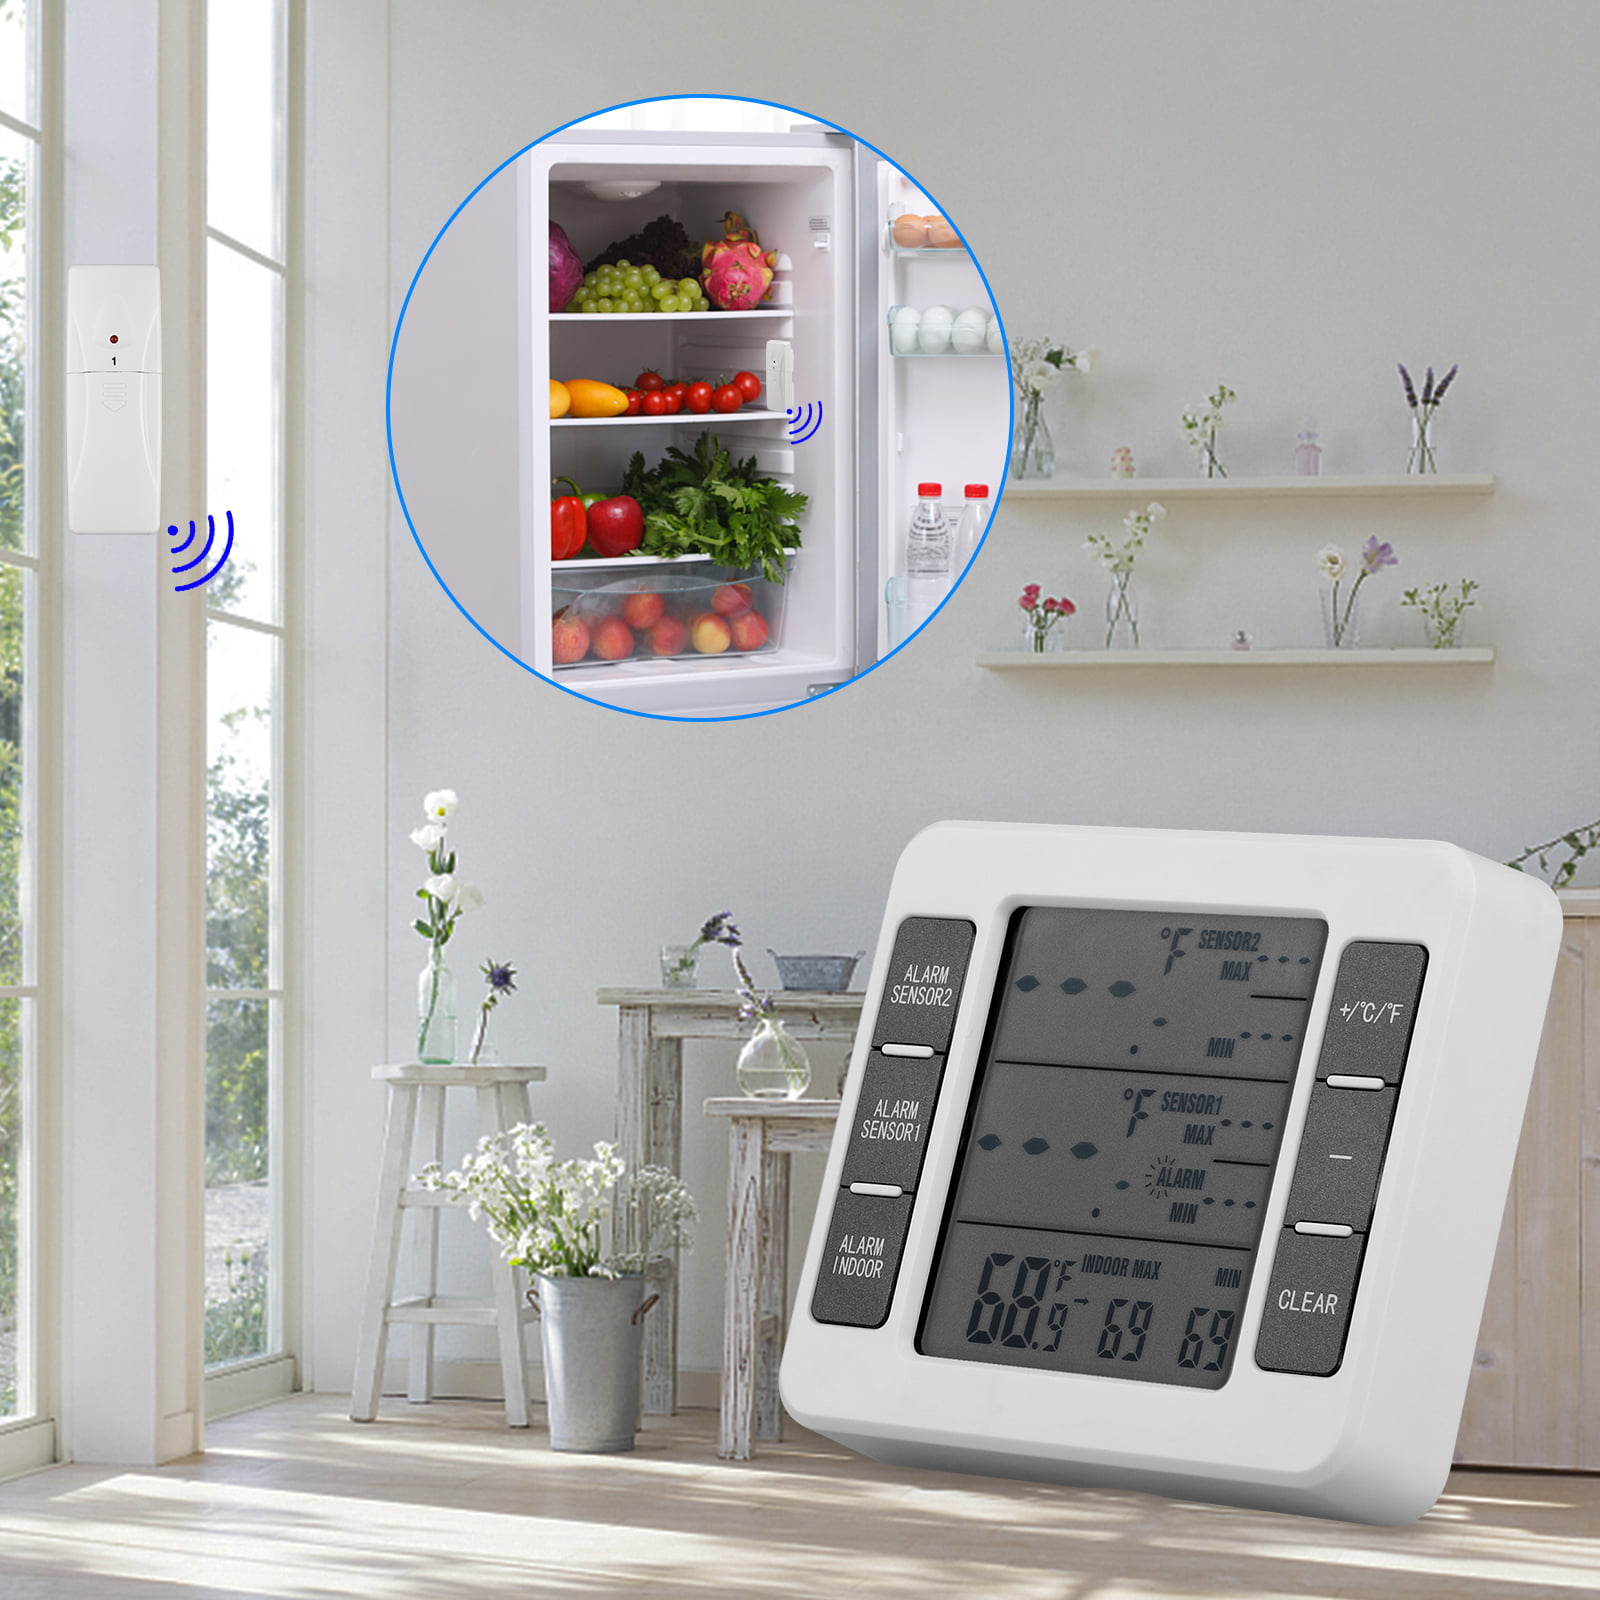 KeeKit Refrigerator Thermometer, Indoor Outdoor Thermometer with 2